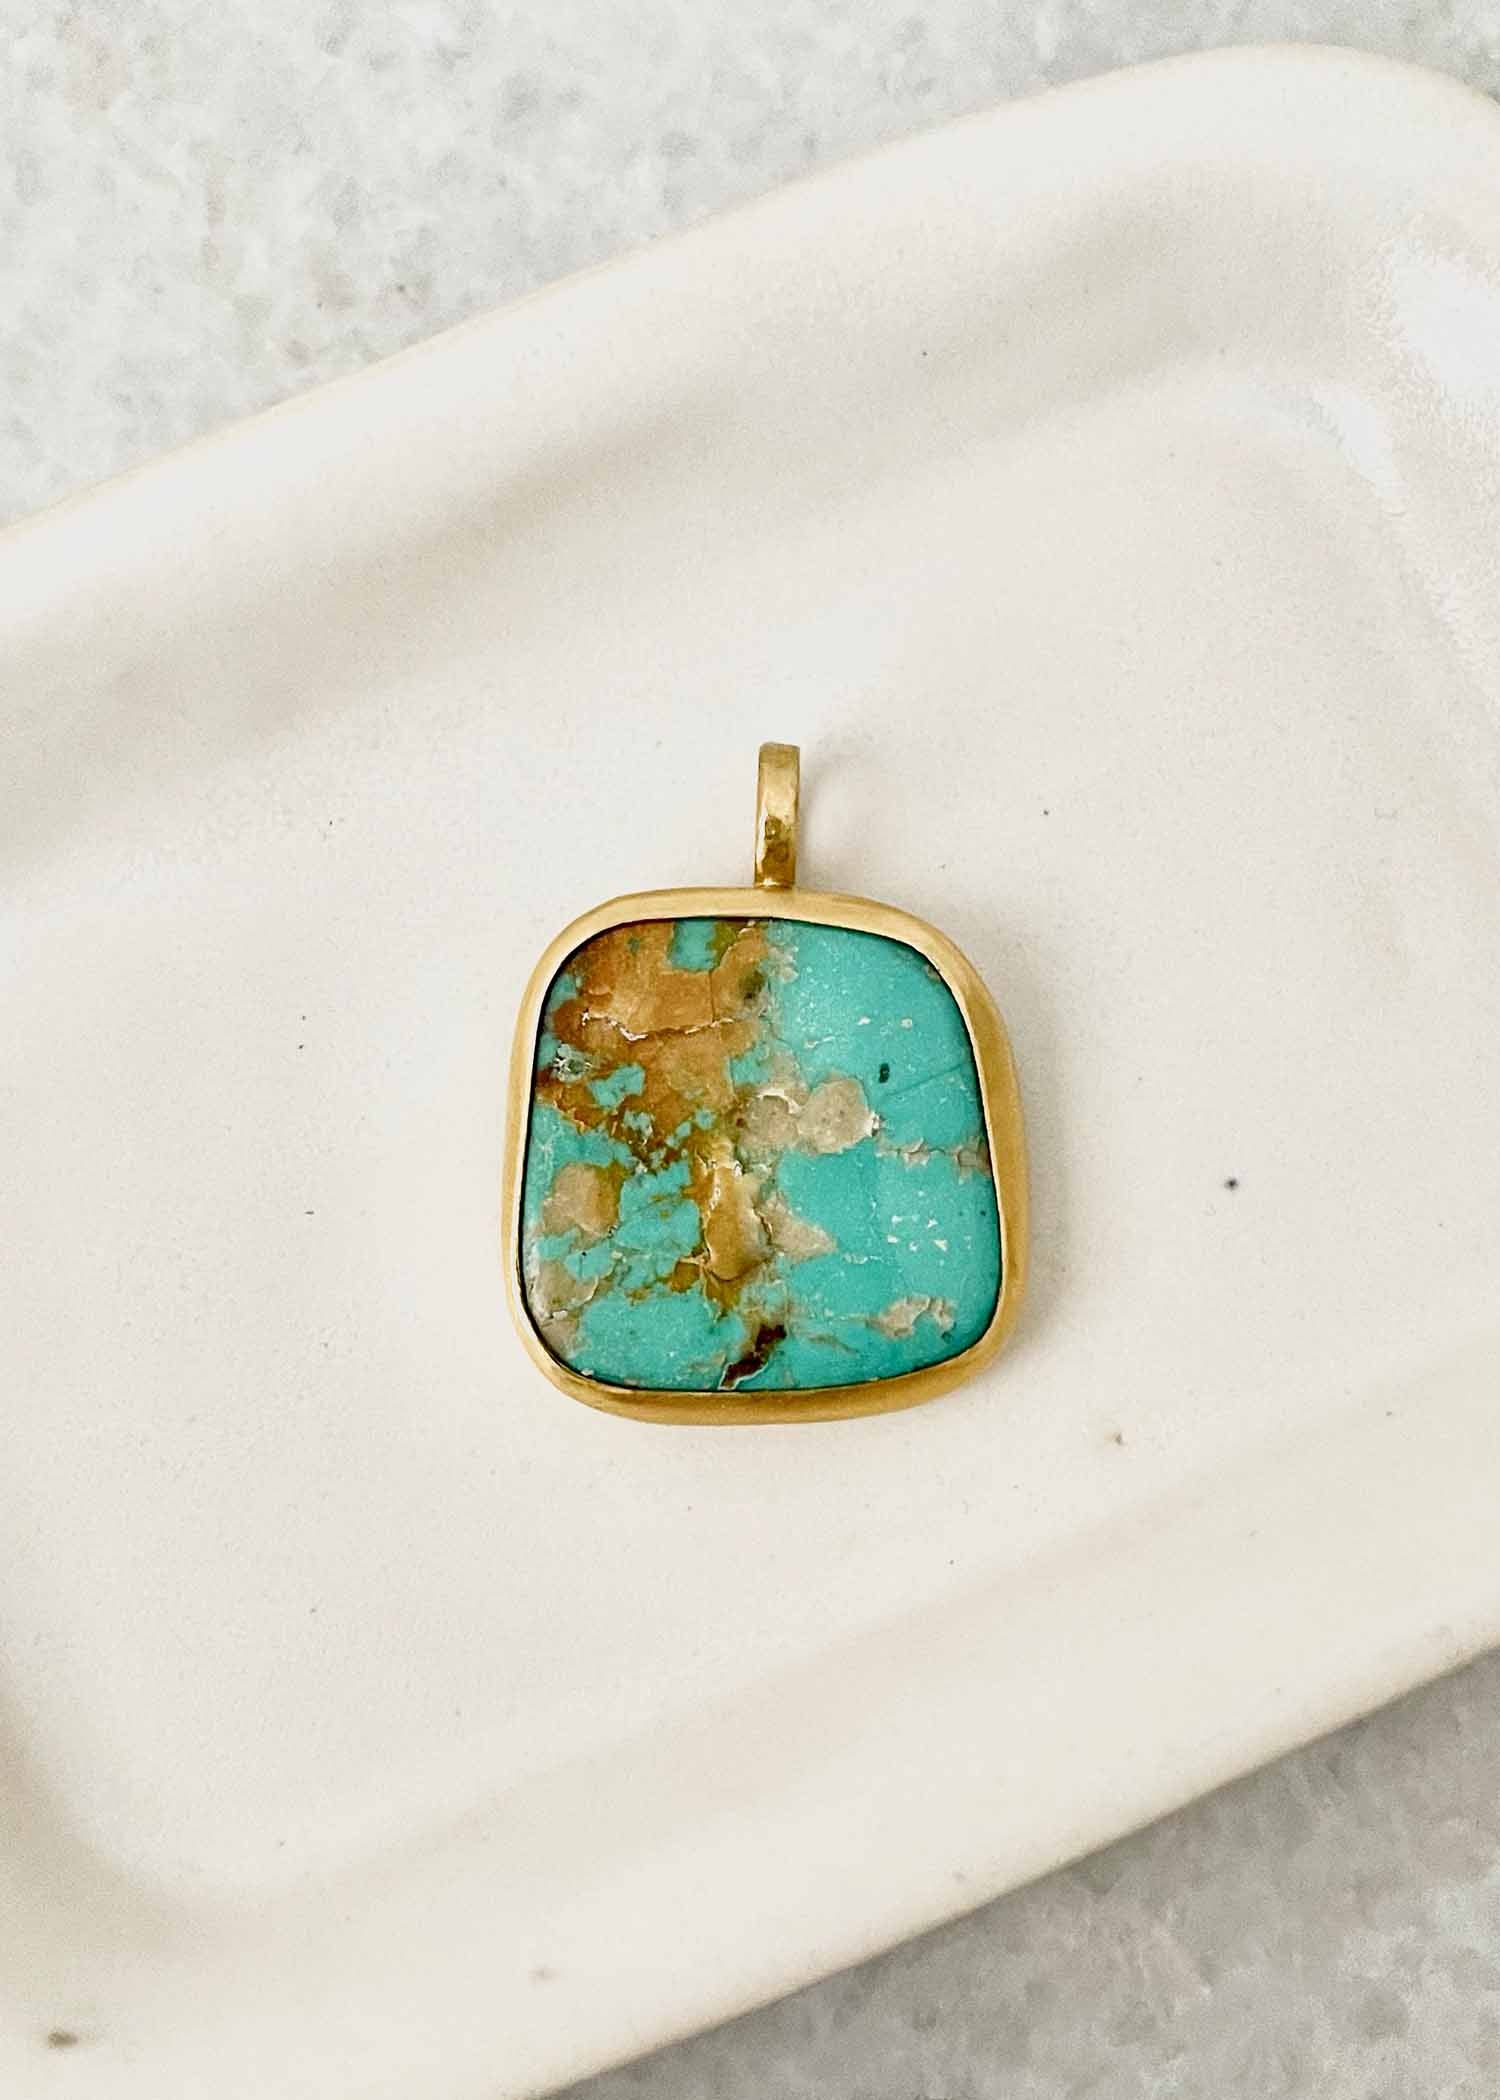 heike-large-square-turquoise-hachita-mine-new-mexico-set-in-22k-gold-back-in-18k-gold | Jewelry | Heike Grebenstein